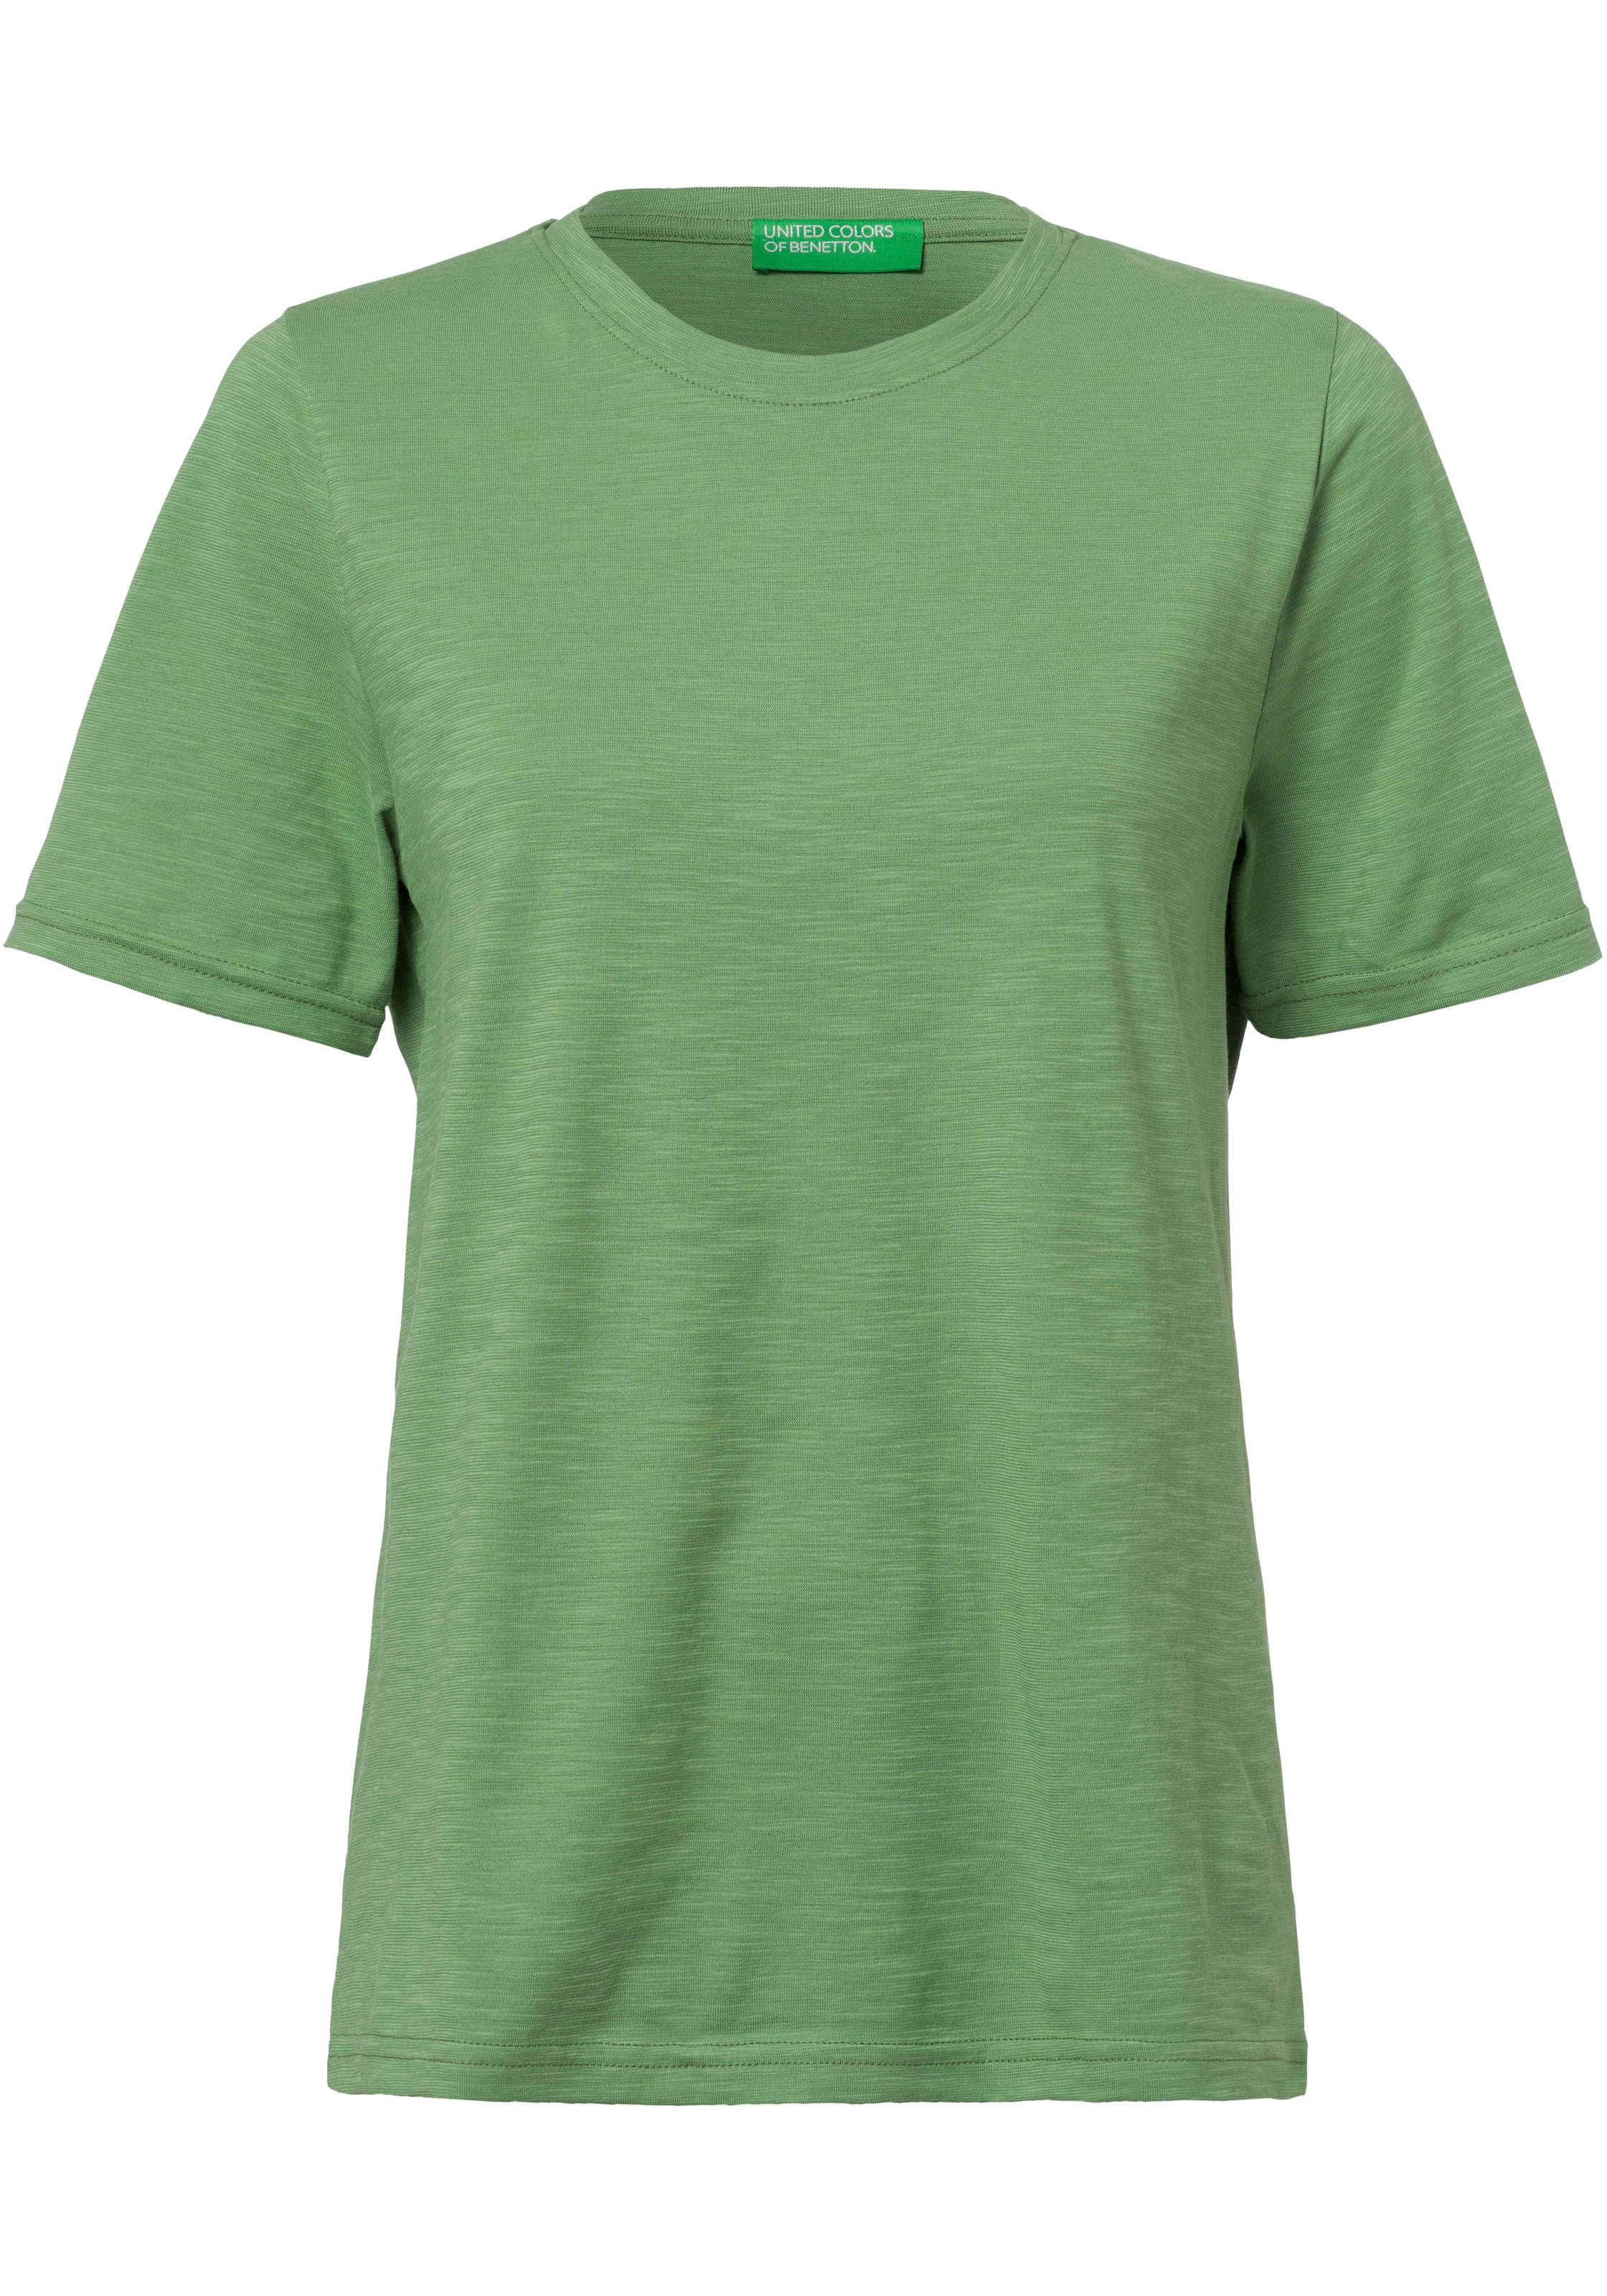 of cleaner bei in Colors United T-Shirt, Benetton Basic-Optik ♕